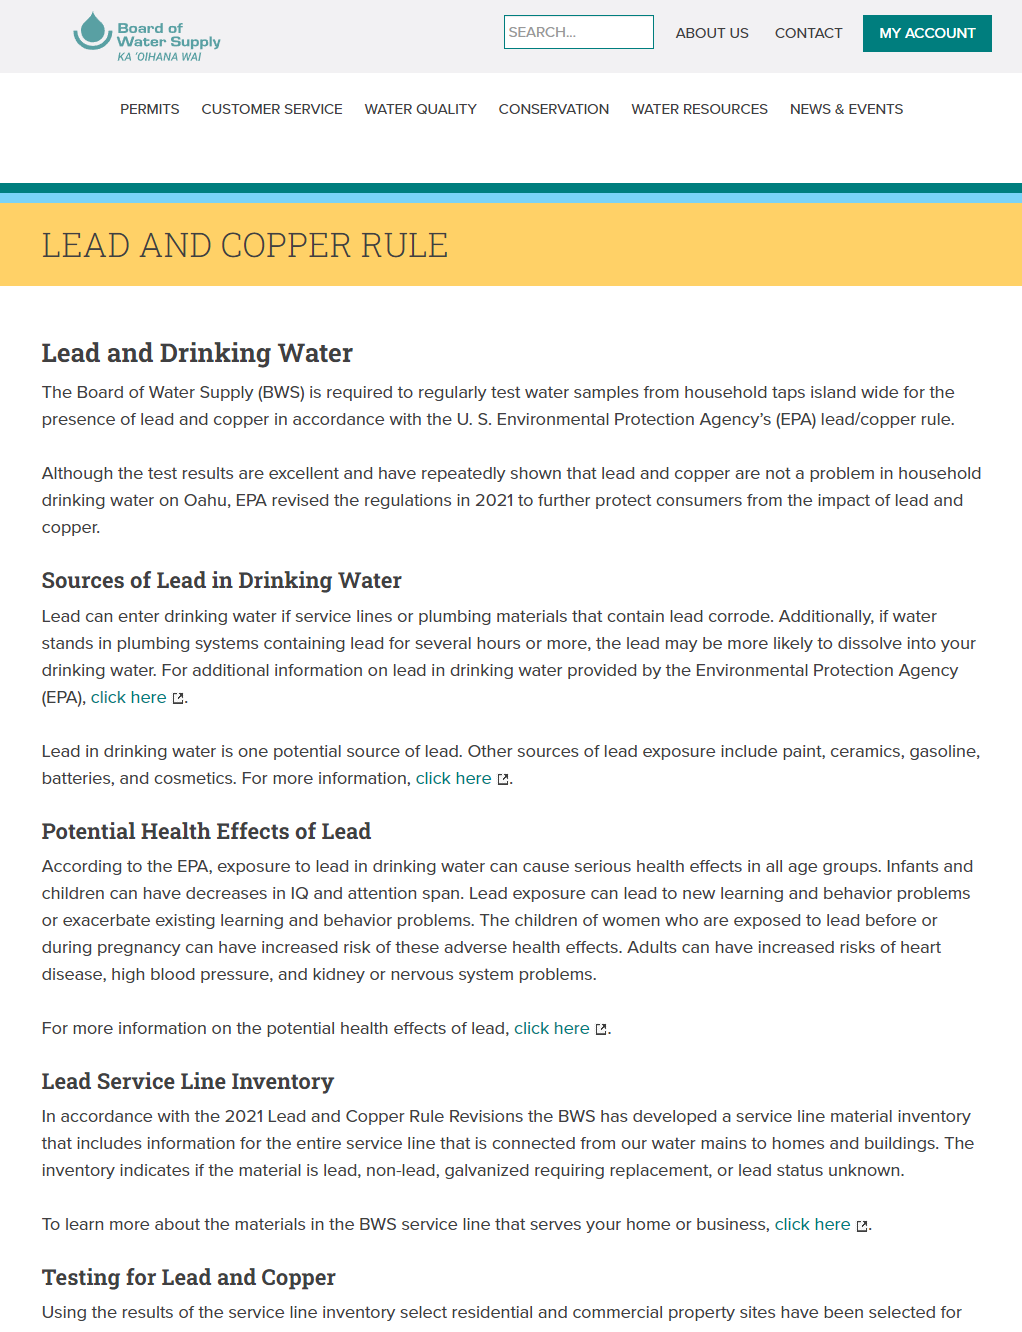 lead and copper rule page